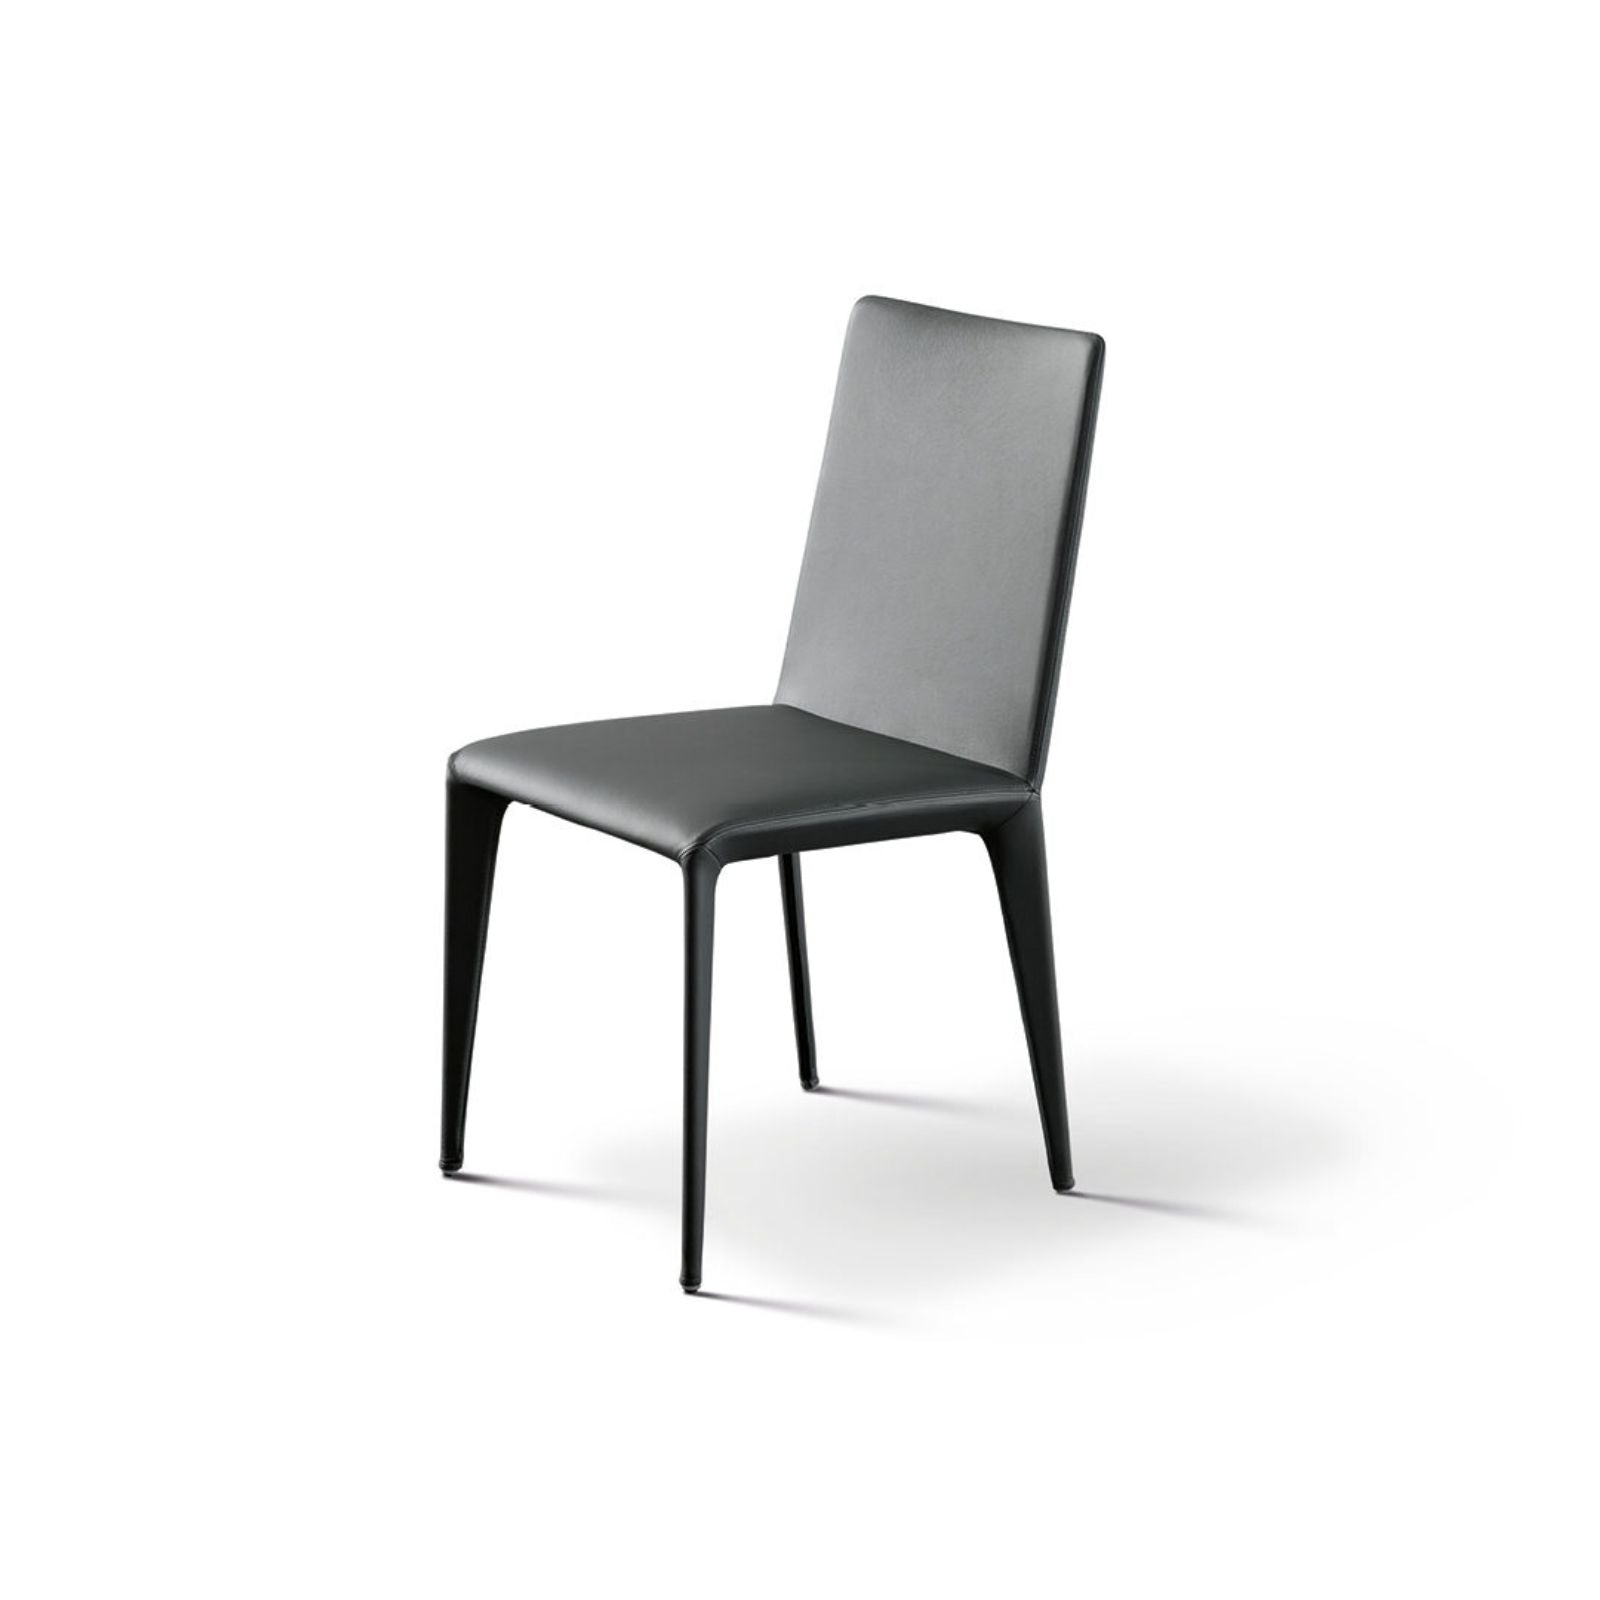 Filly Up | Dining Chair